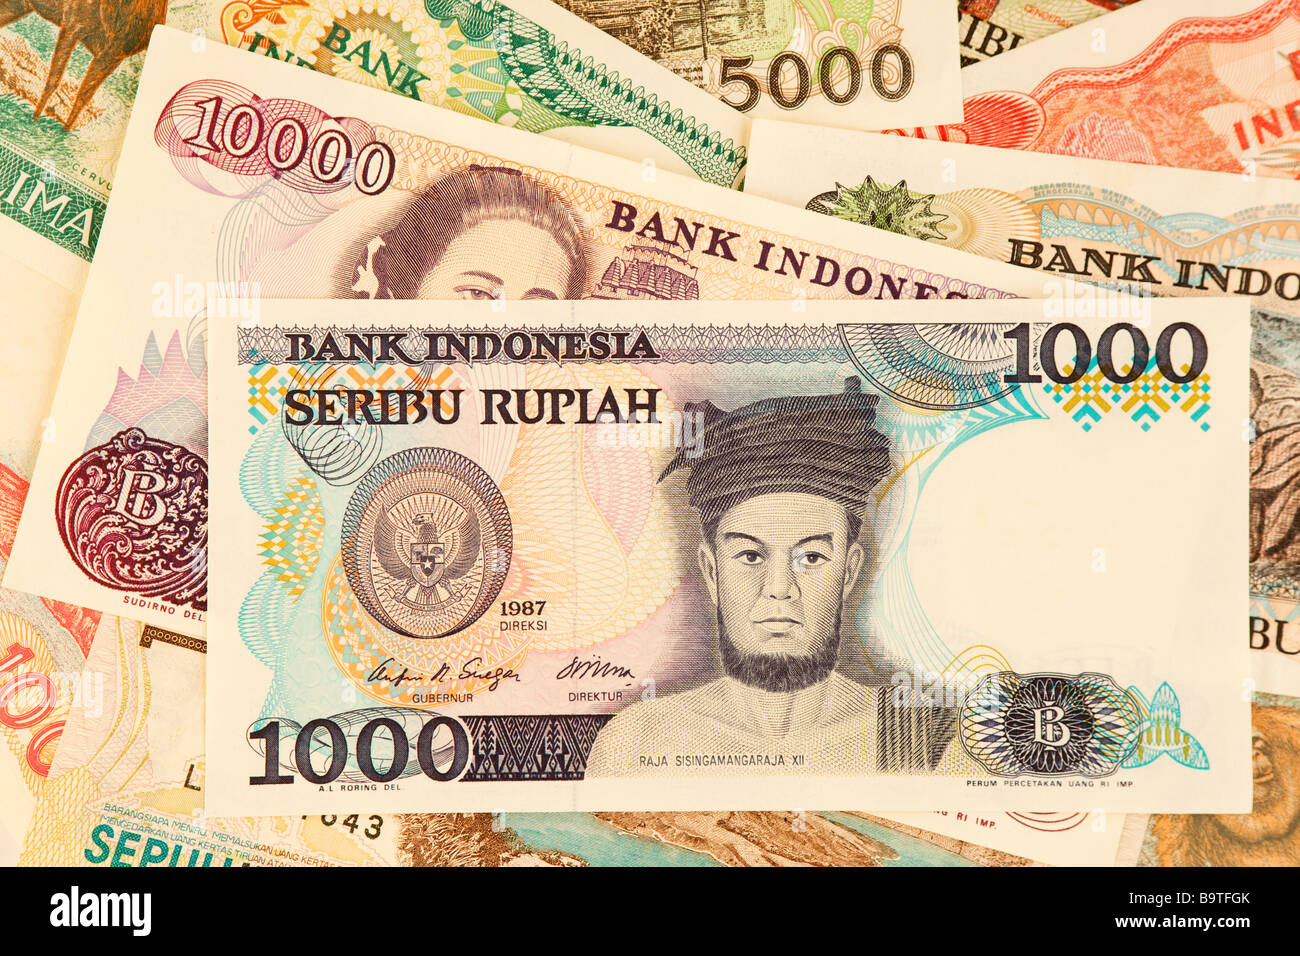 Money currency detail of Indonesian banknotes Stock Photo